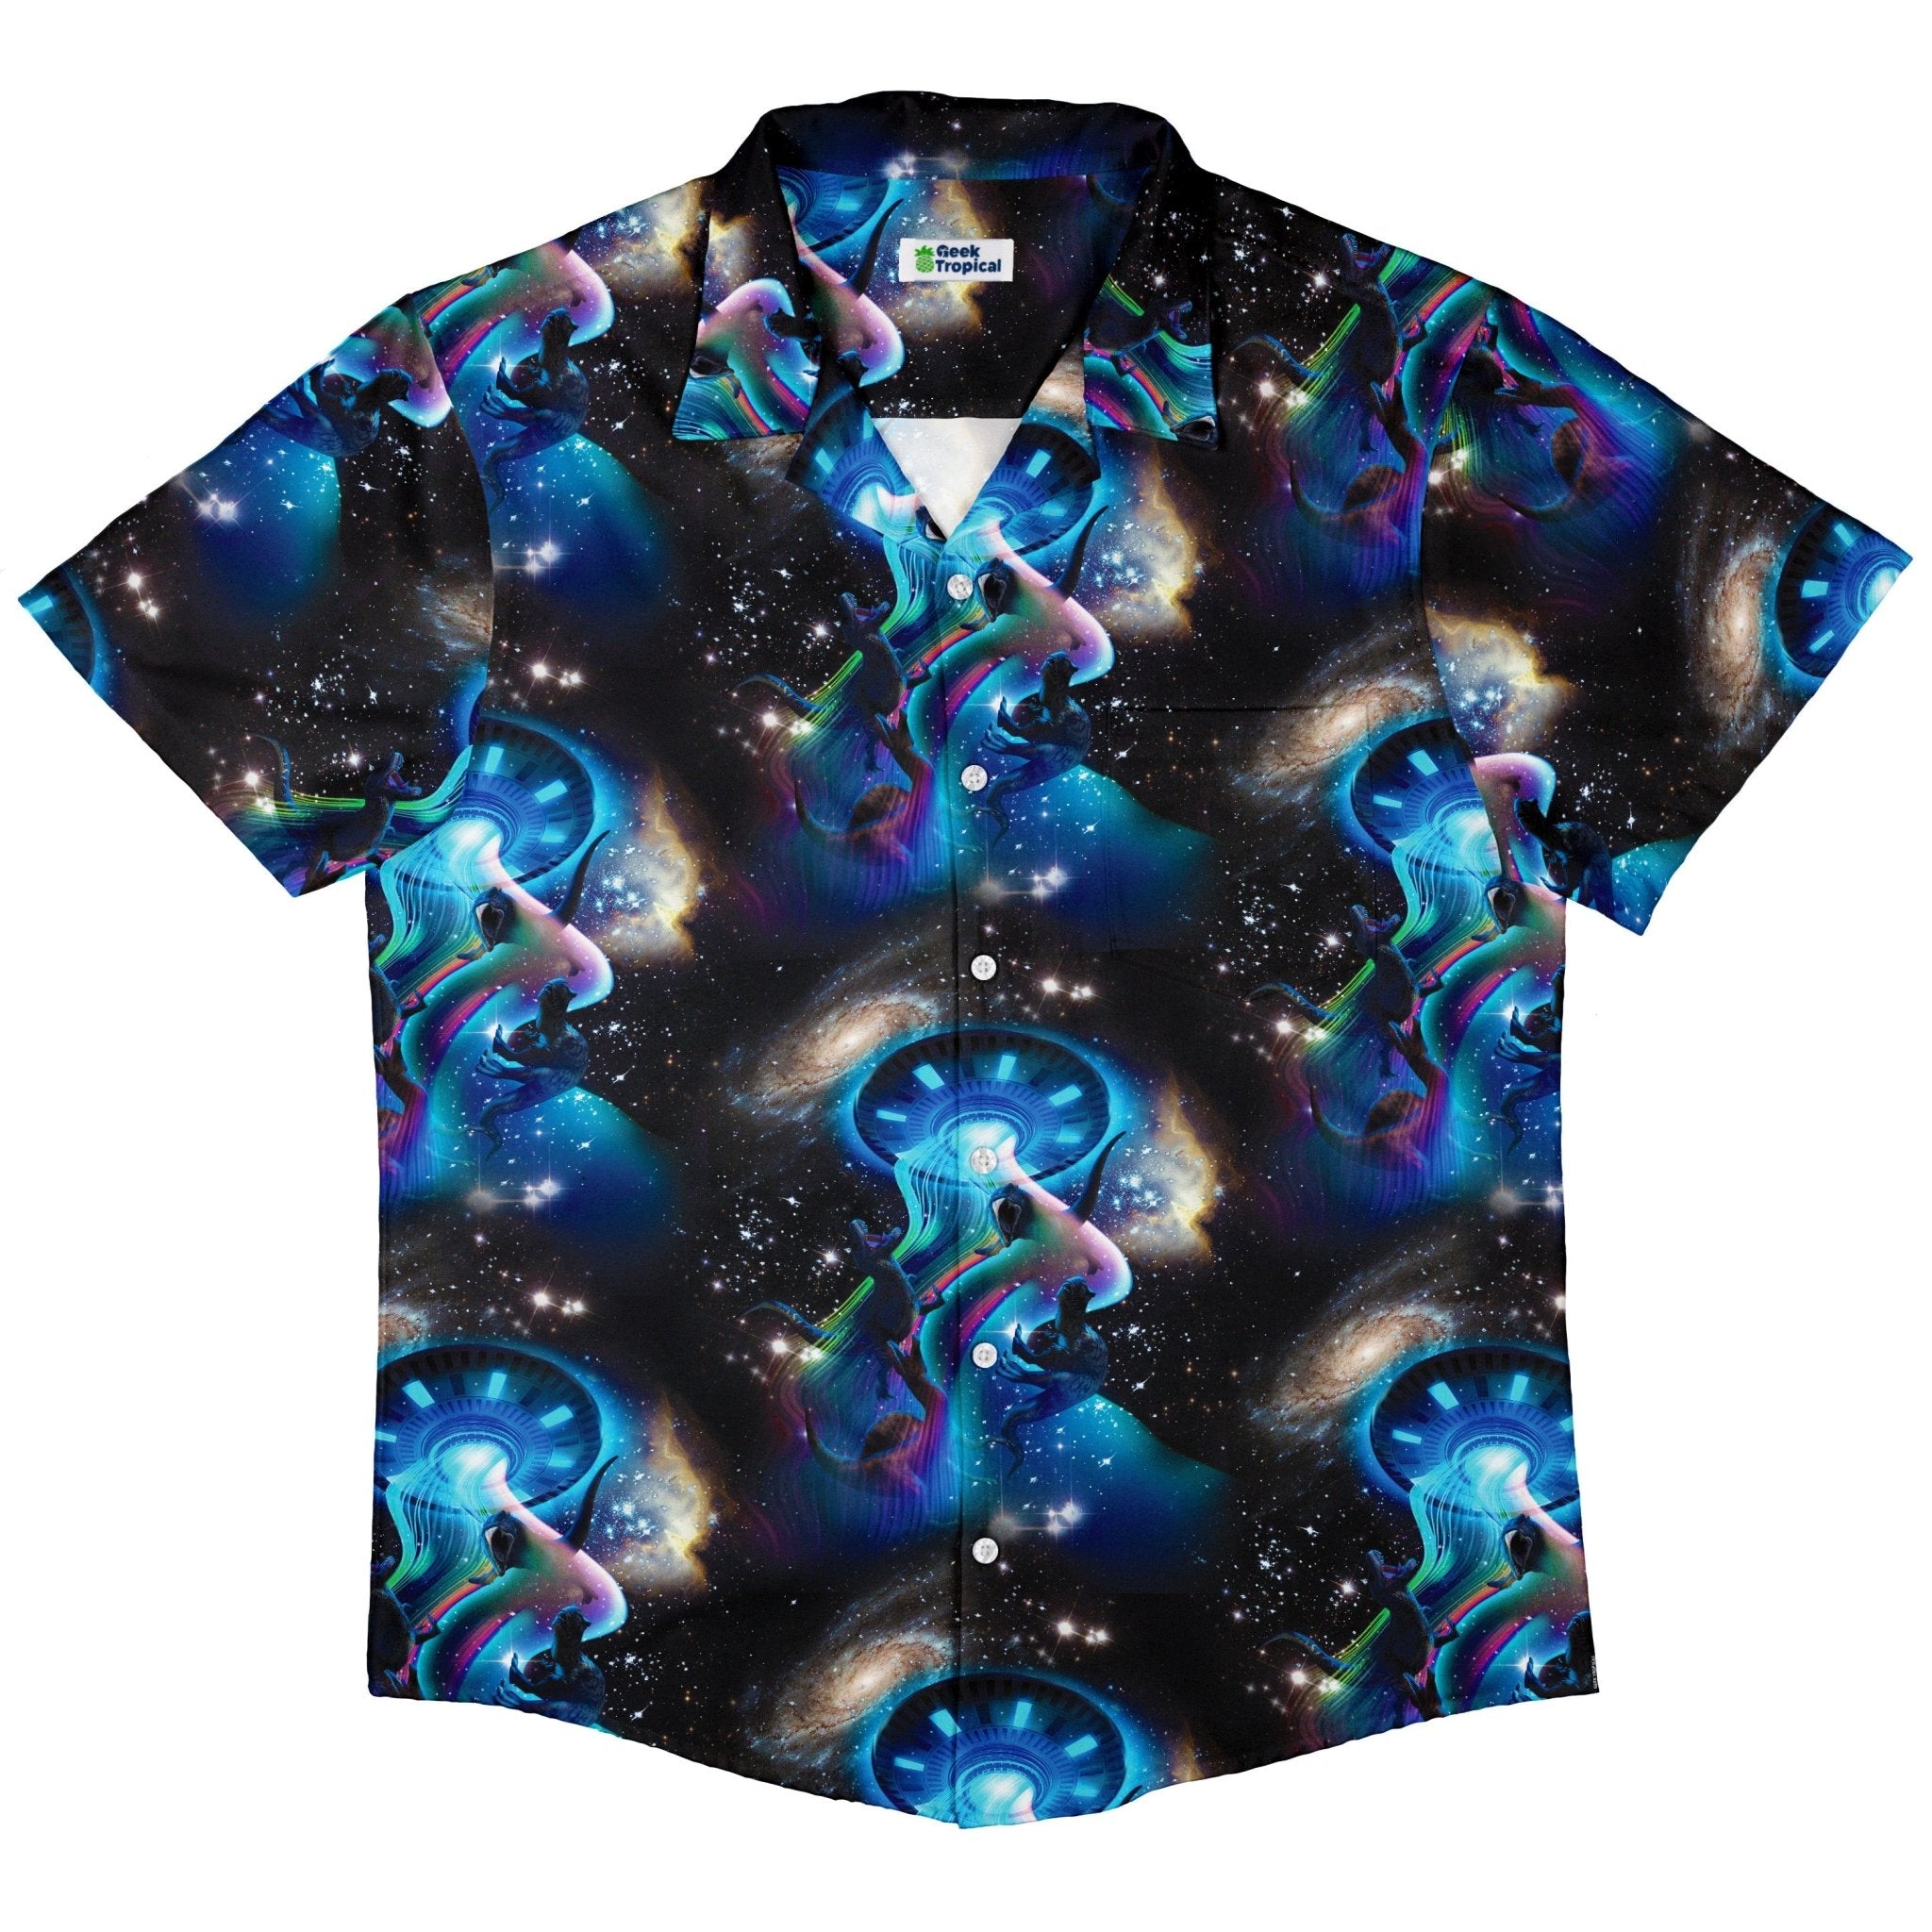 UFO Abduction of Dinosaurs Button Up Shirt - adult sizing - Design by Random Galaxy - Maximalist Patterns